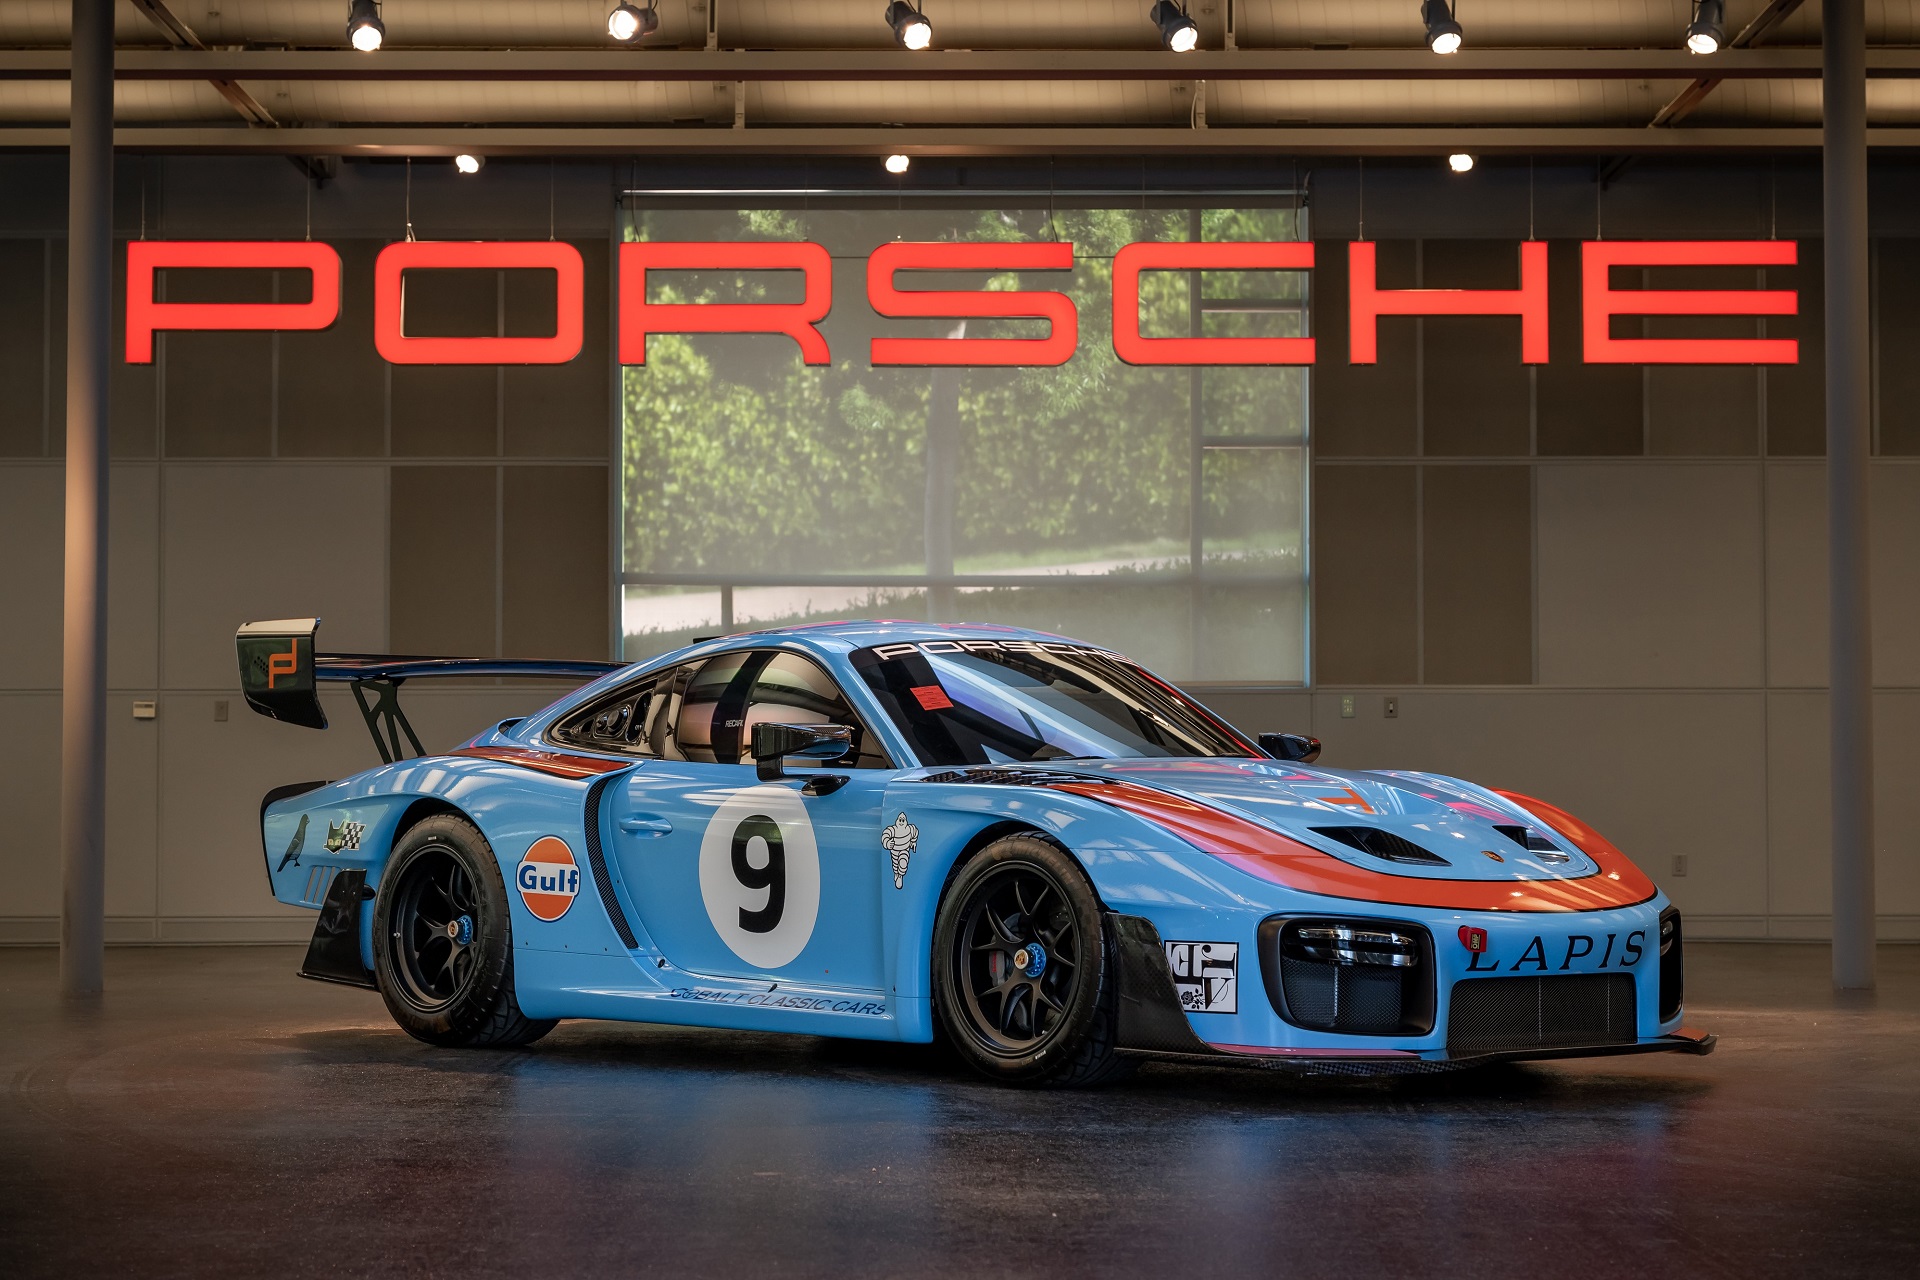 front-angled view of a Gulf-liveried 2019 Porsche 935